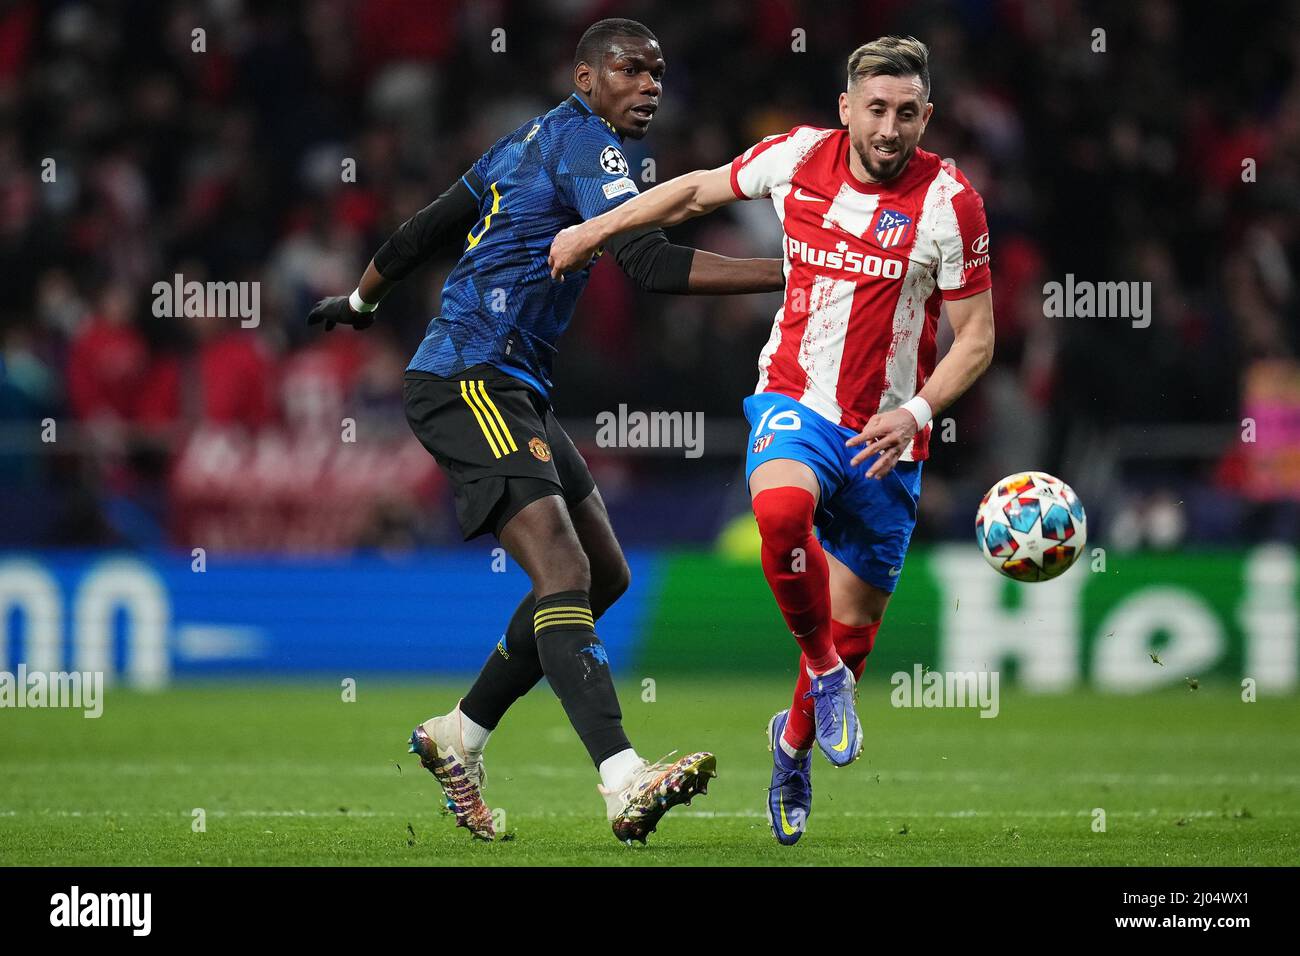 Paul Pogba of Manchester United and Hector Herrera of Atletico during the UEFA Champions League match, round of 16 between Atletico de Madrid and Manchester United played at Wanda Metropolitano Stadium on February 23, 2022 in Madrid, Spain.  (Colas Buera / Magma / Pressinphoto) Stock Photo